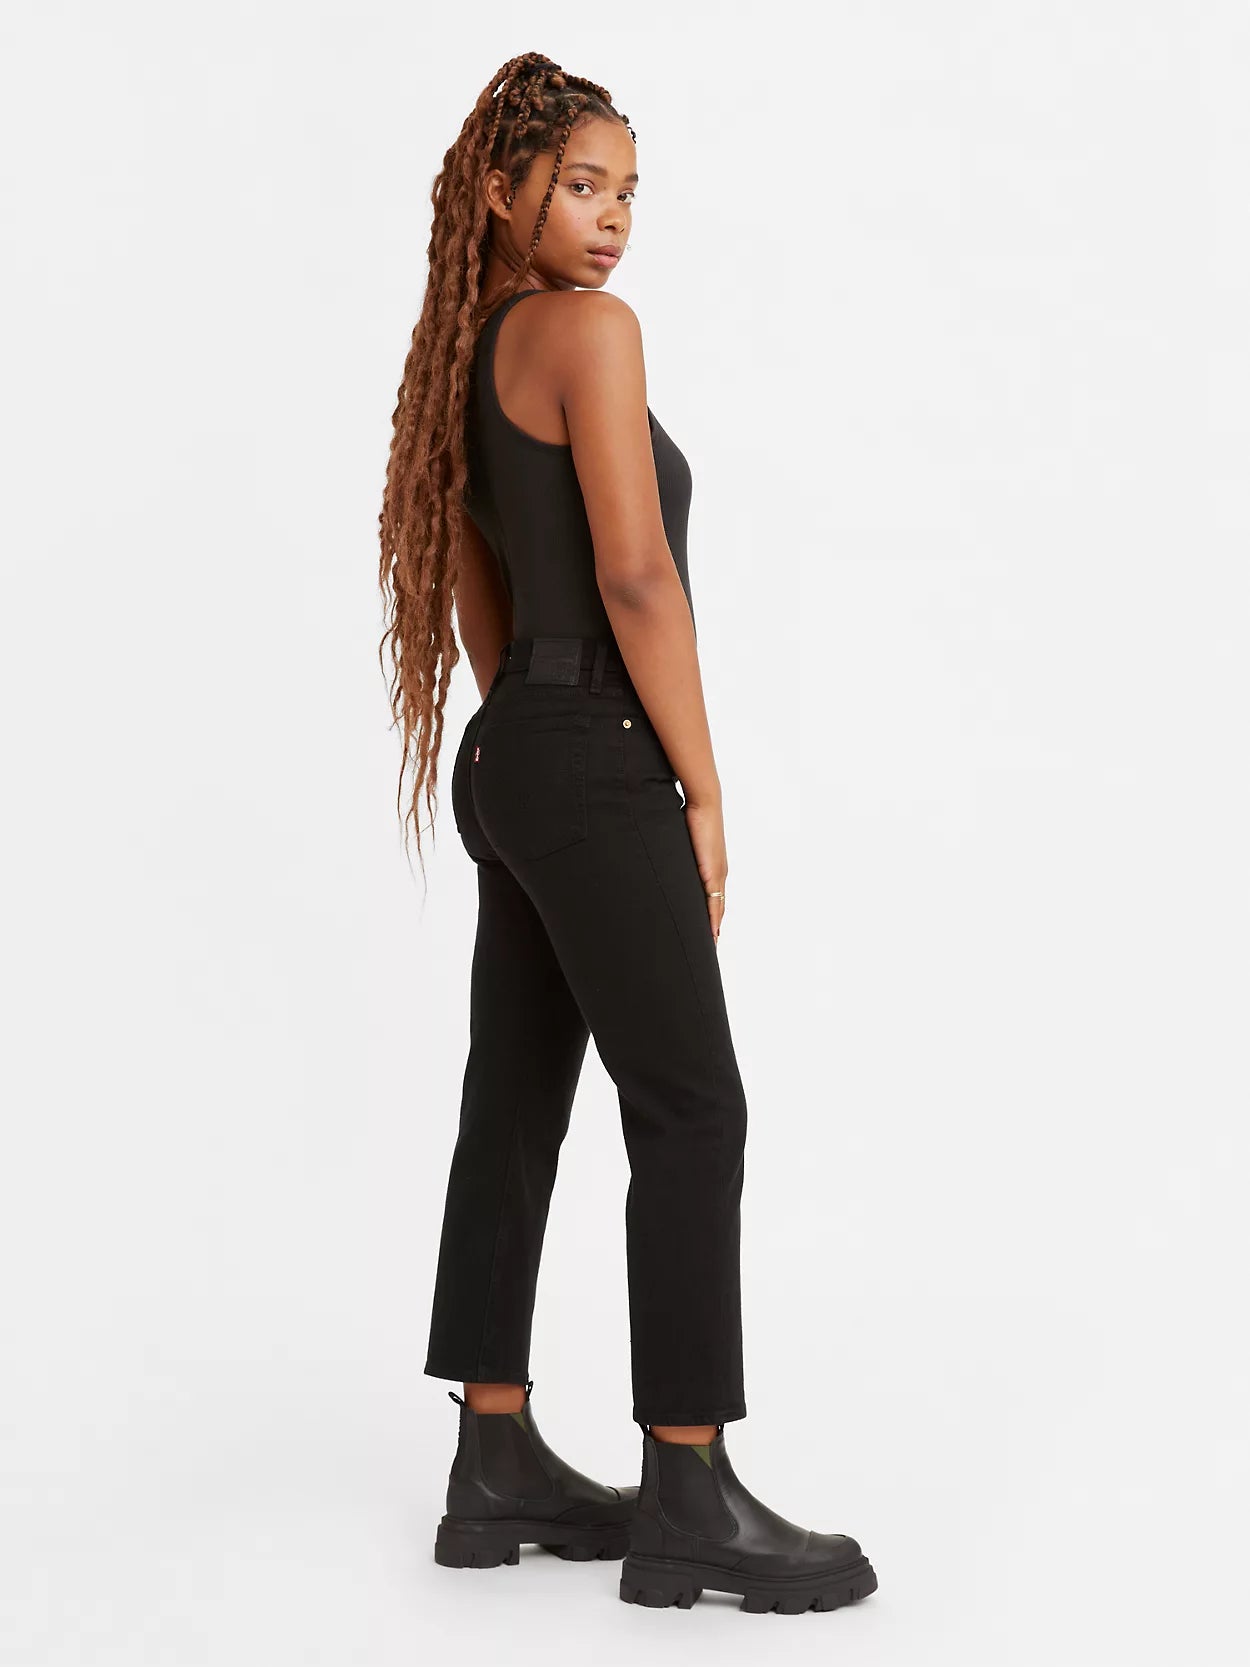 Levi's Wedgie Straight - Black Sprout - Maude